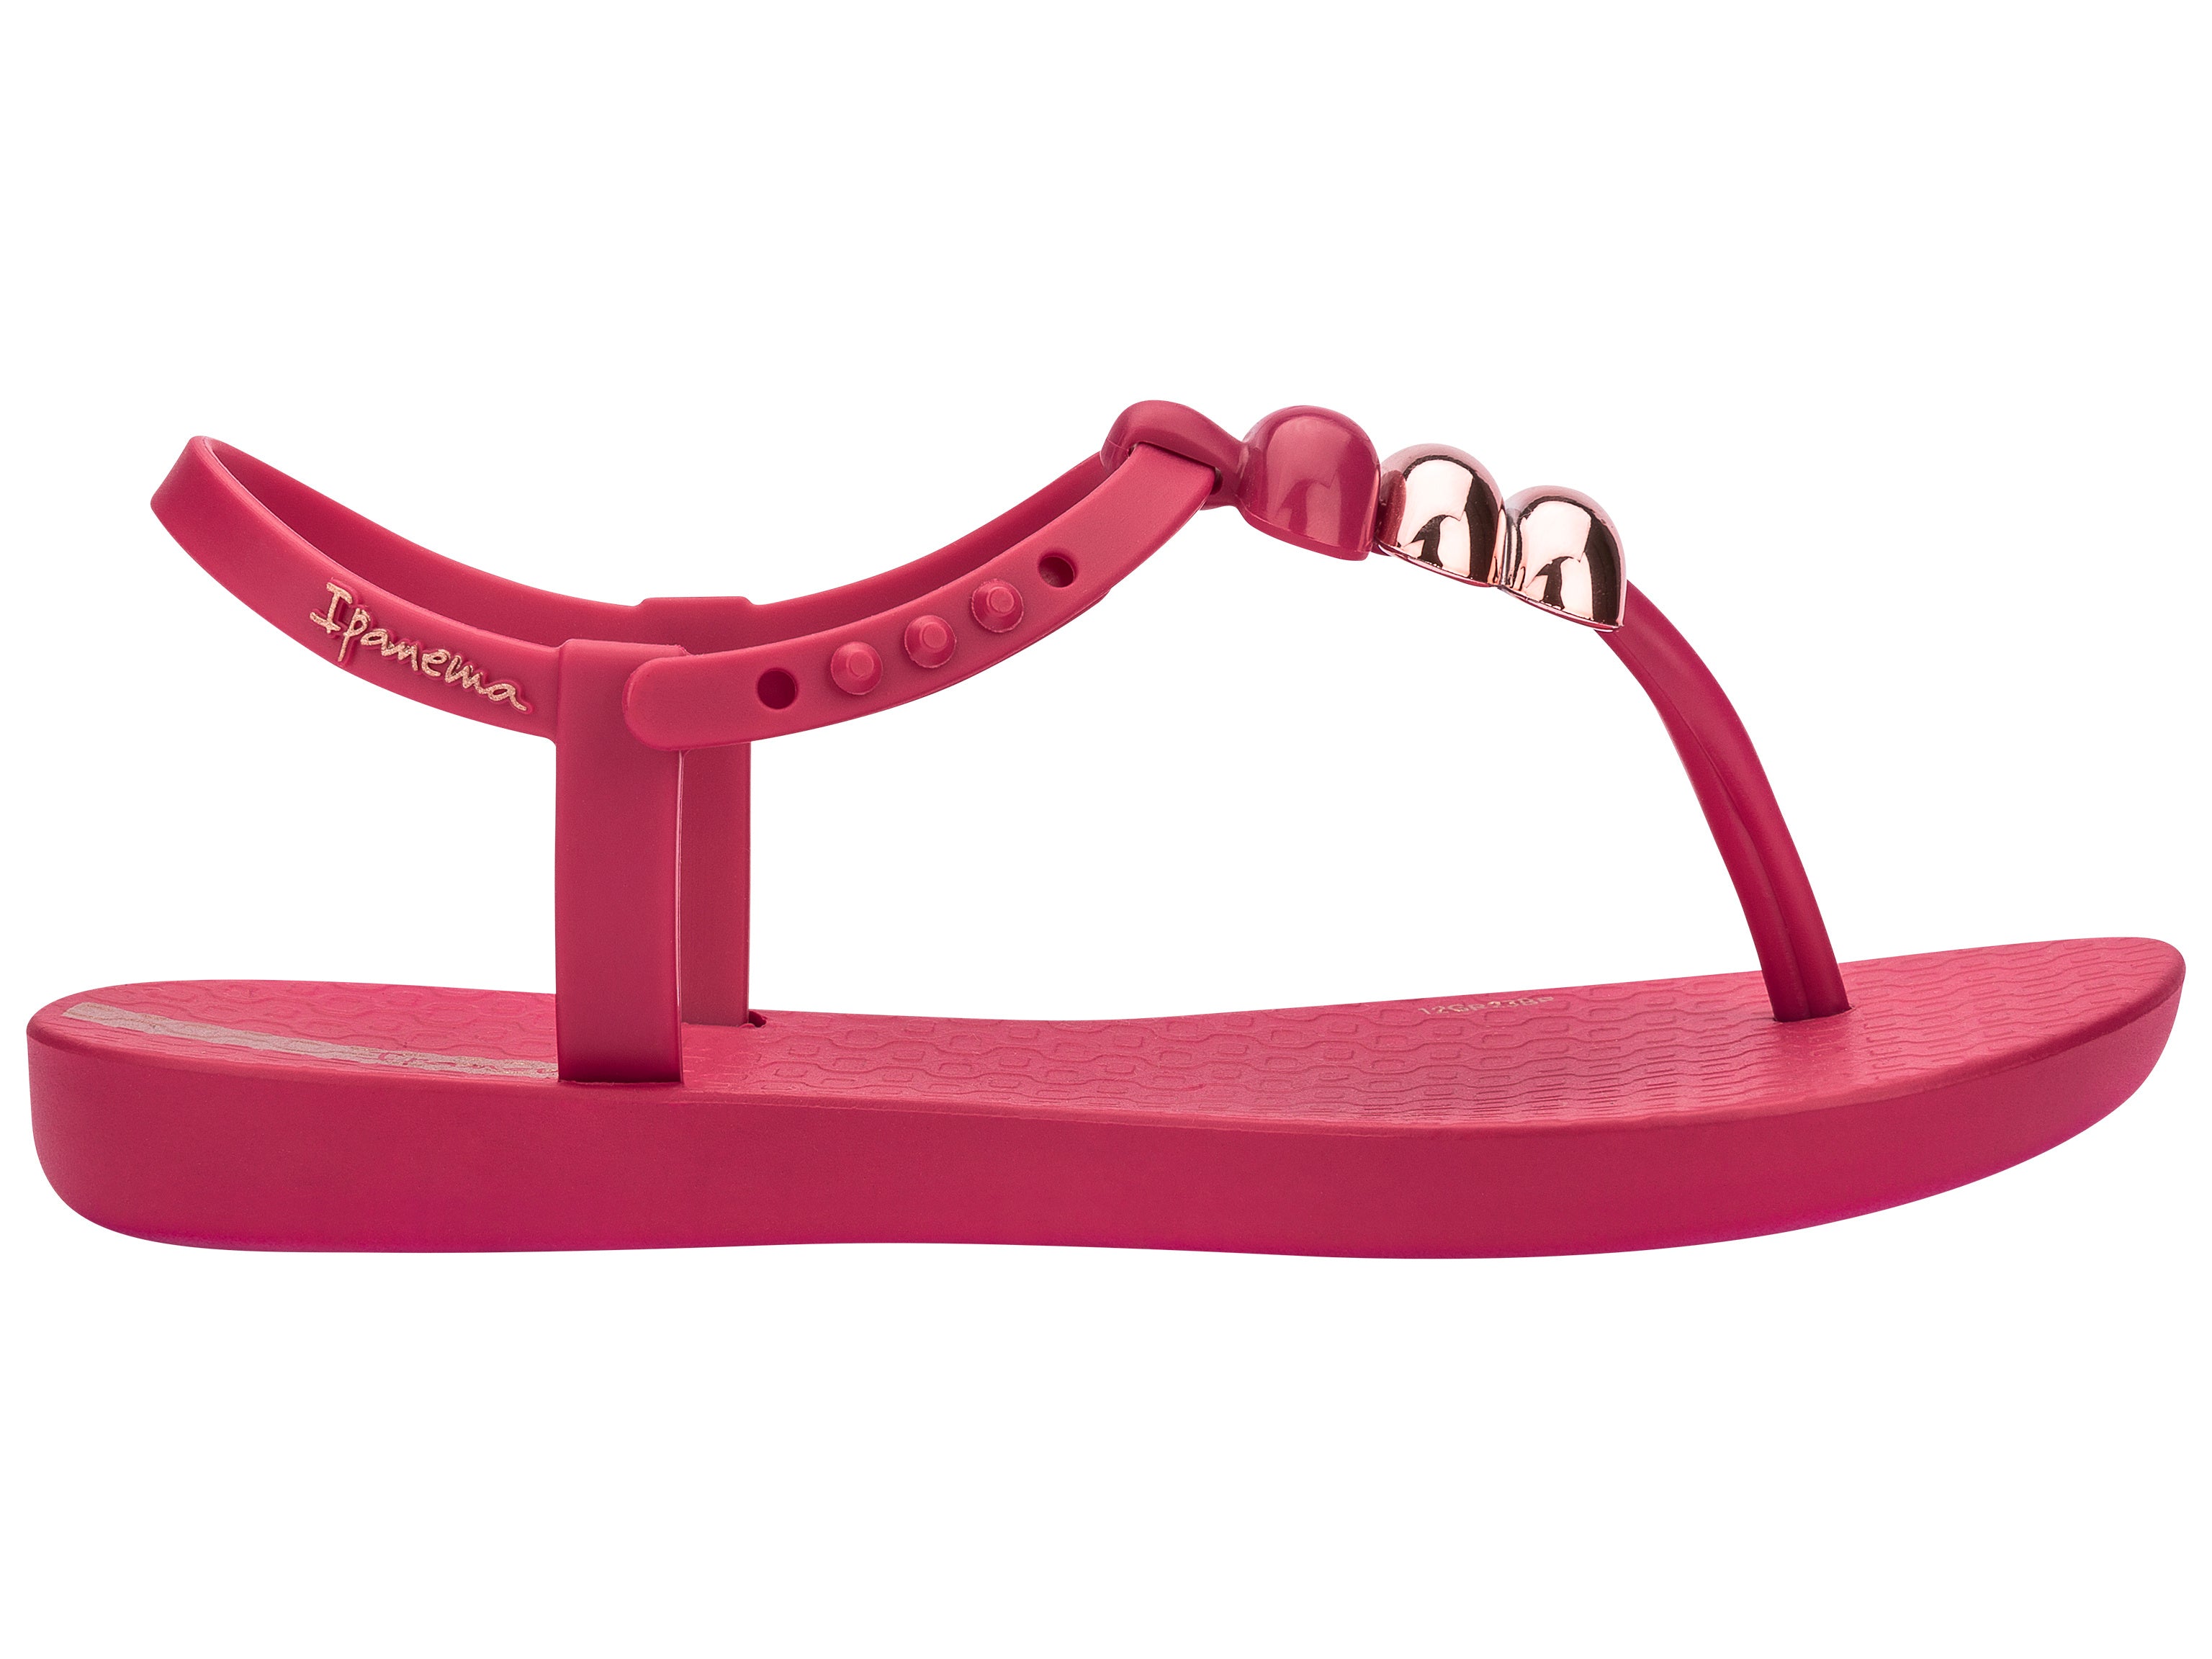 Outer side view of a pink Ipanema Class kids' t-strap sandal with 3 baubles on the strap.